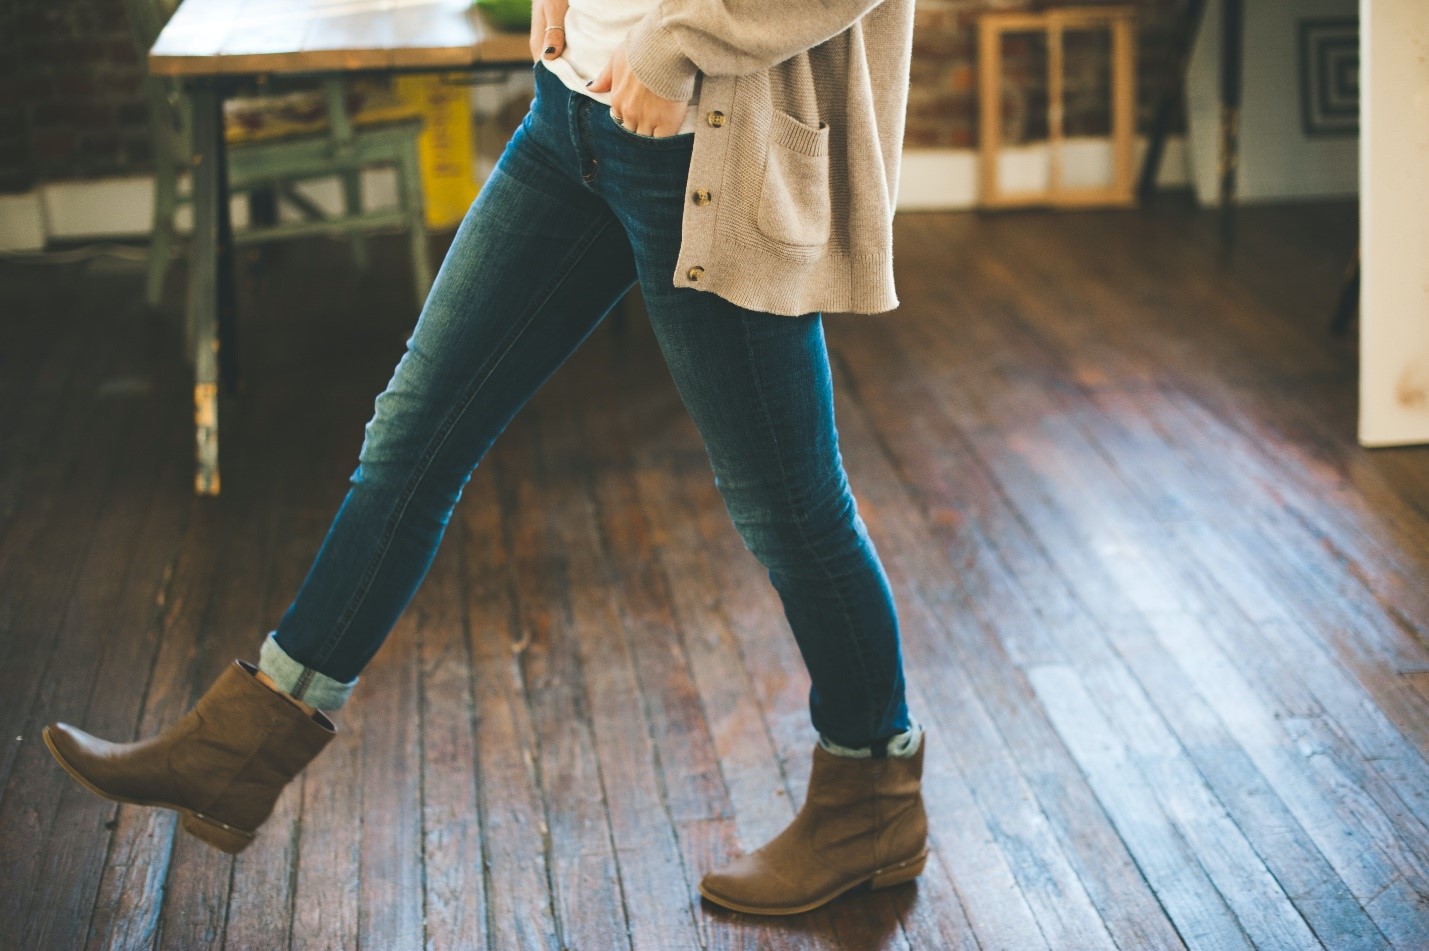 7 Sturdy Work Boots for Hard Working Ladies